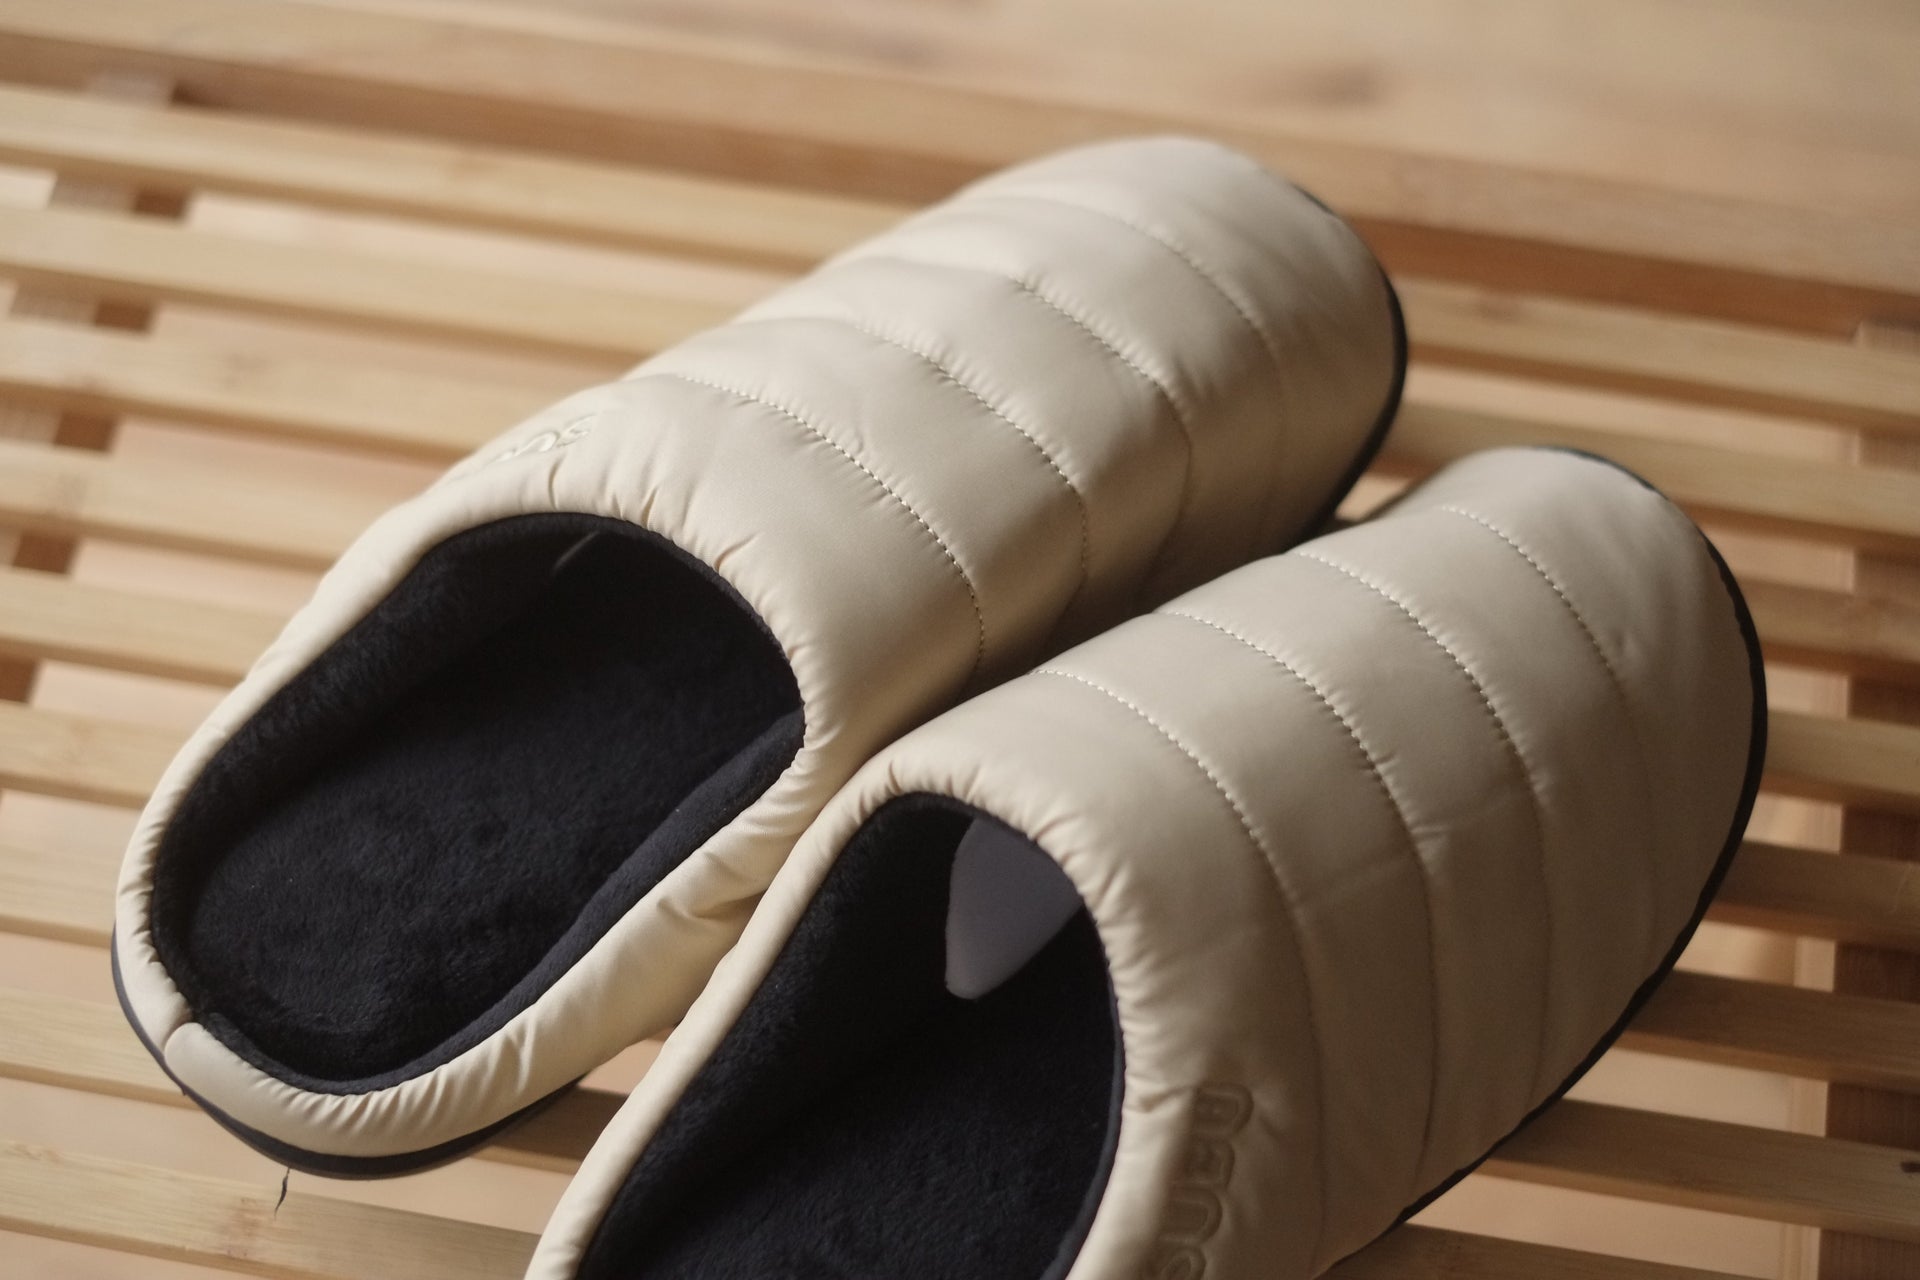 Fall/Winter 23" slippers by SUBU